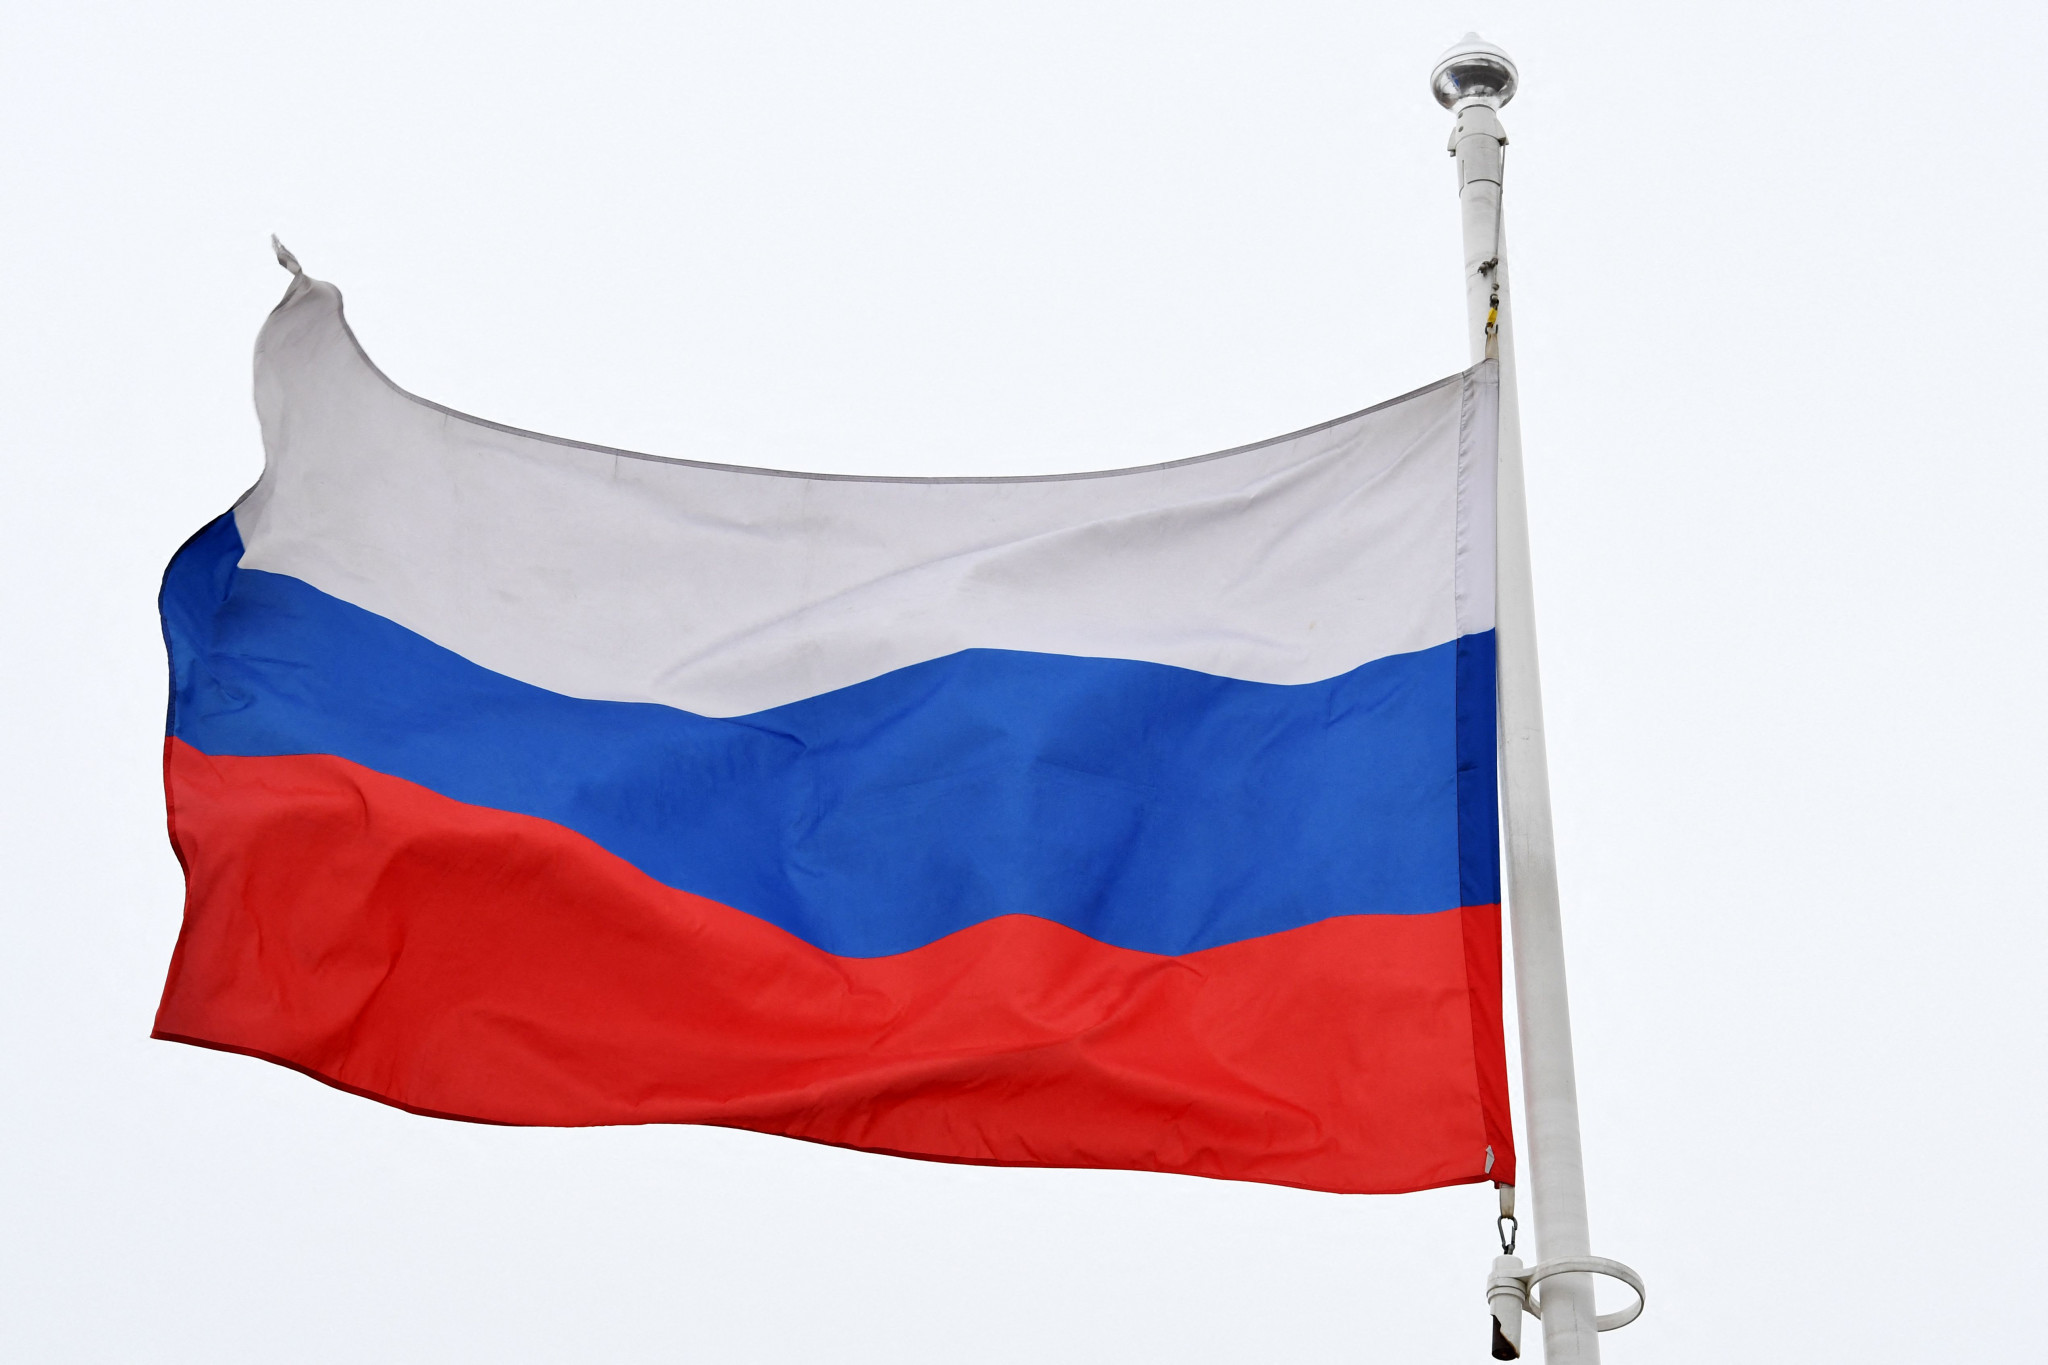 Russian flag raised at ALBA Games in Venezuela after invitation to compete